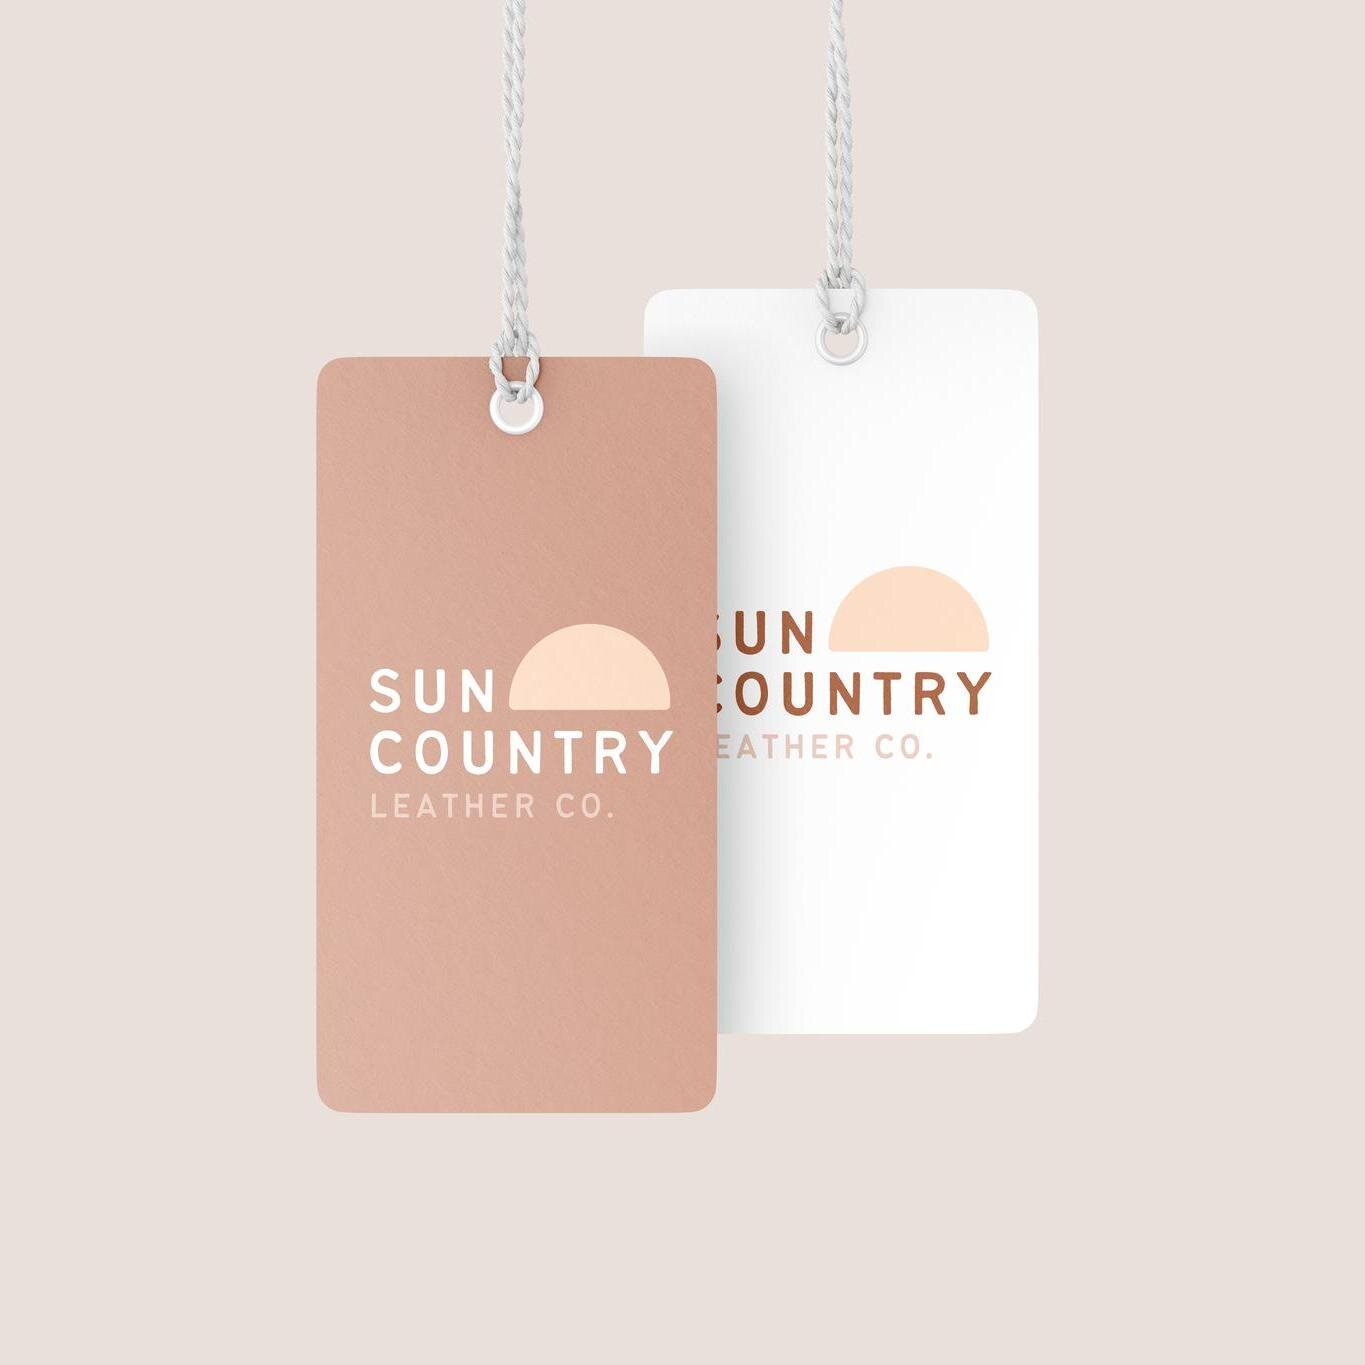 We love supporting Australian-made, small businesses! A rustic logo for @suncountryleather 

👉🏻 Website coming soon!